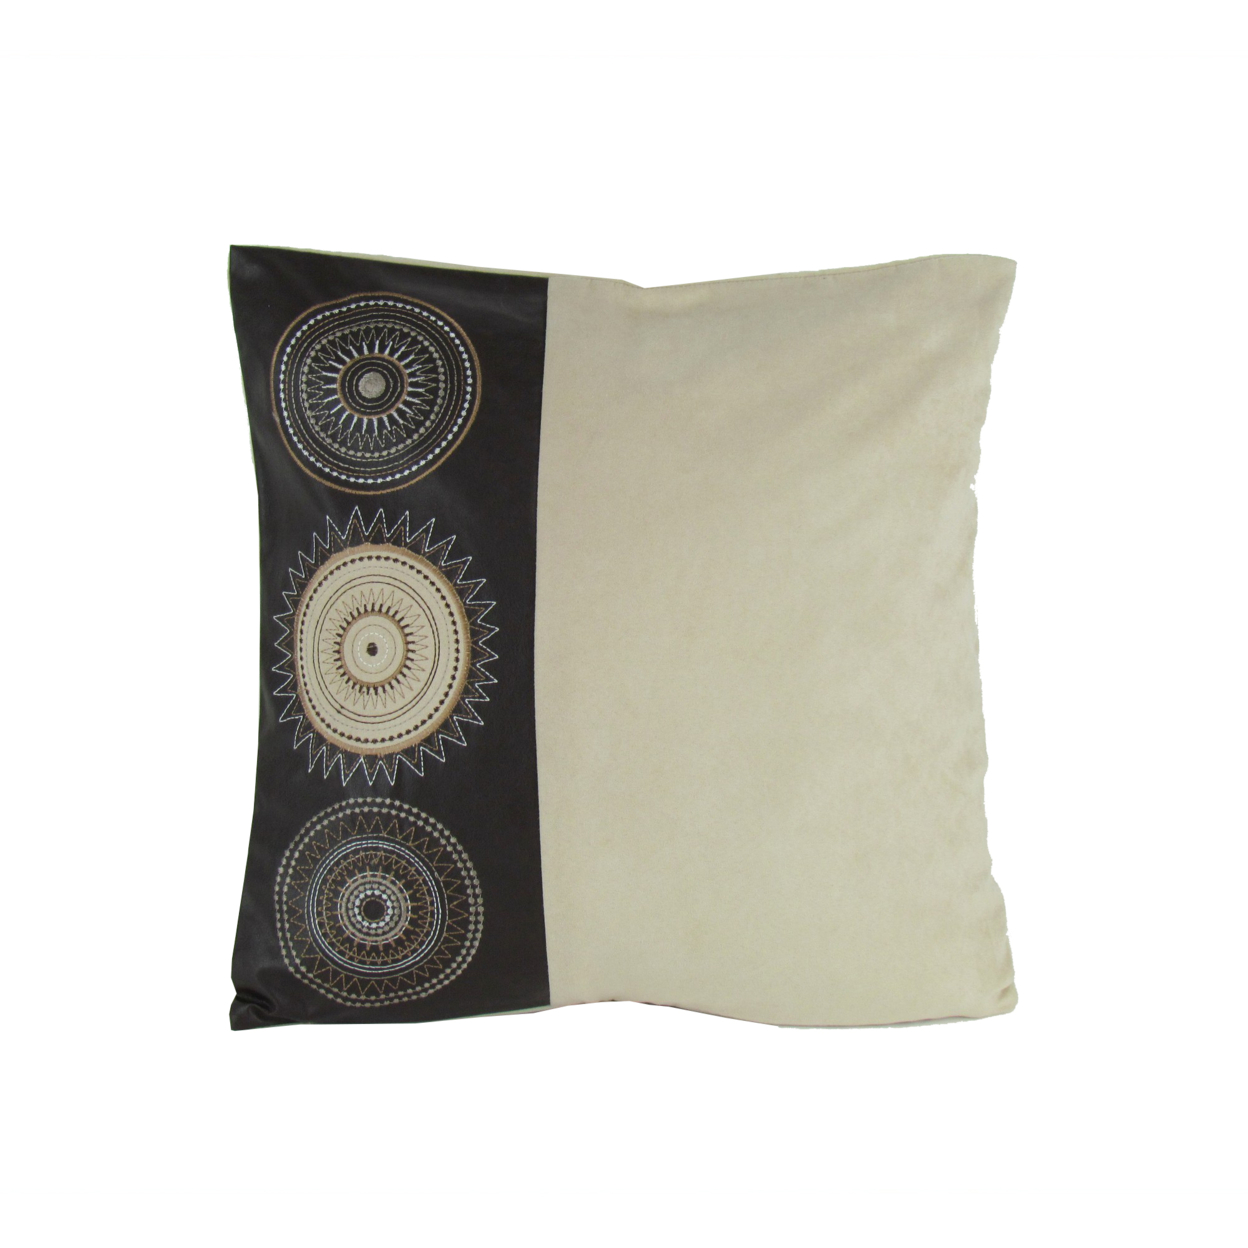 Leatherette And Fabric Accent Pillow, Cream And Brown- Saltoro Sherpi